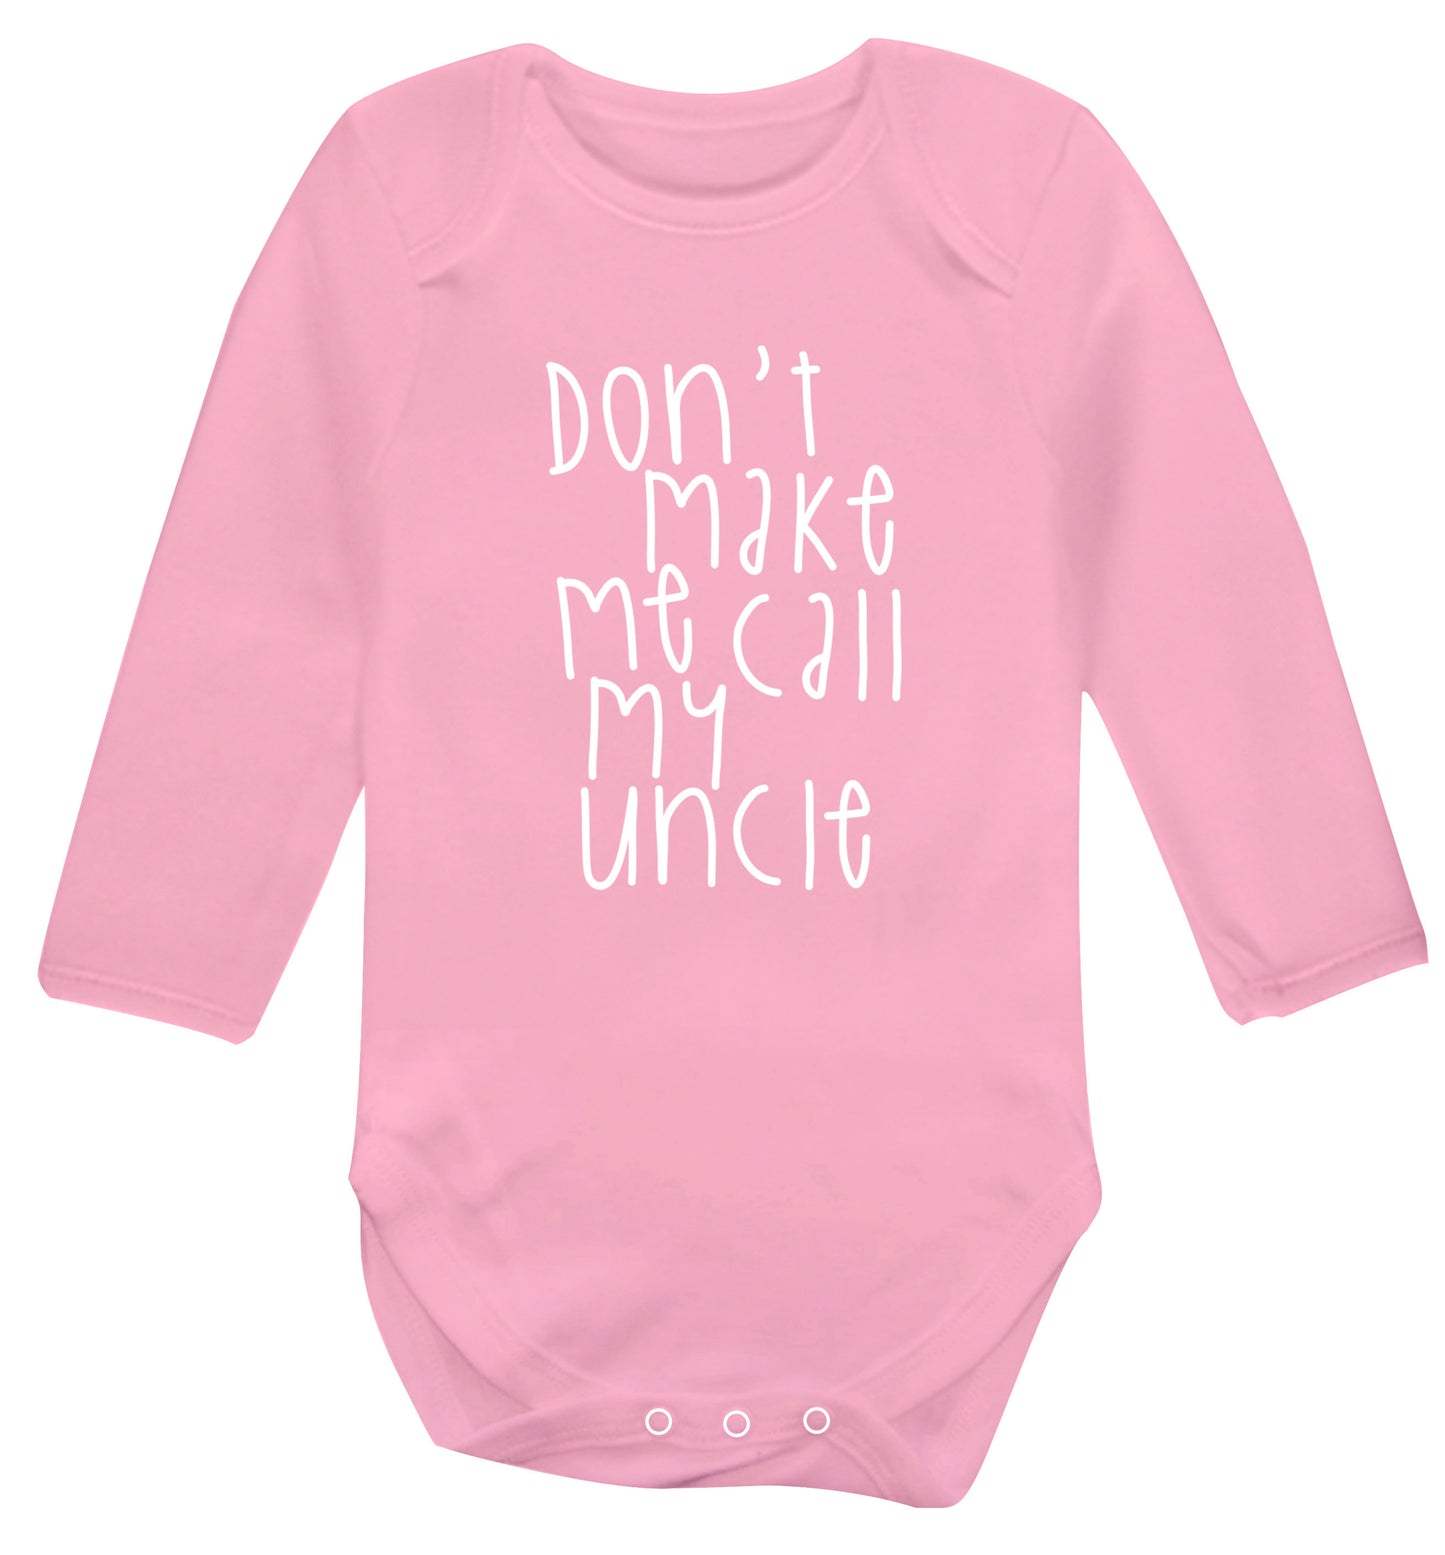 Don't make me call my uncle Baby Vest long sleeved pale pink 6-12 months